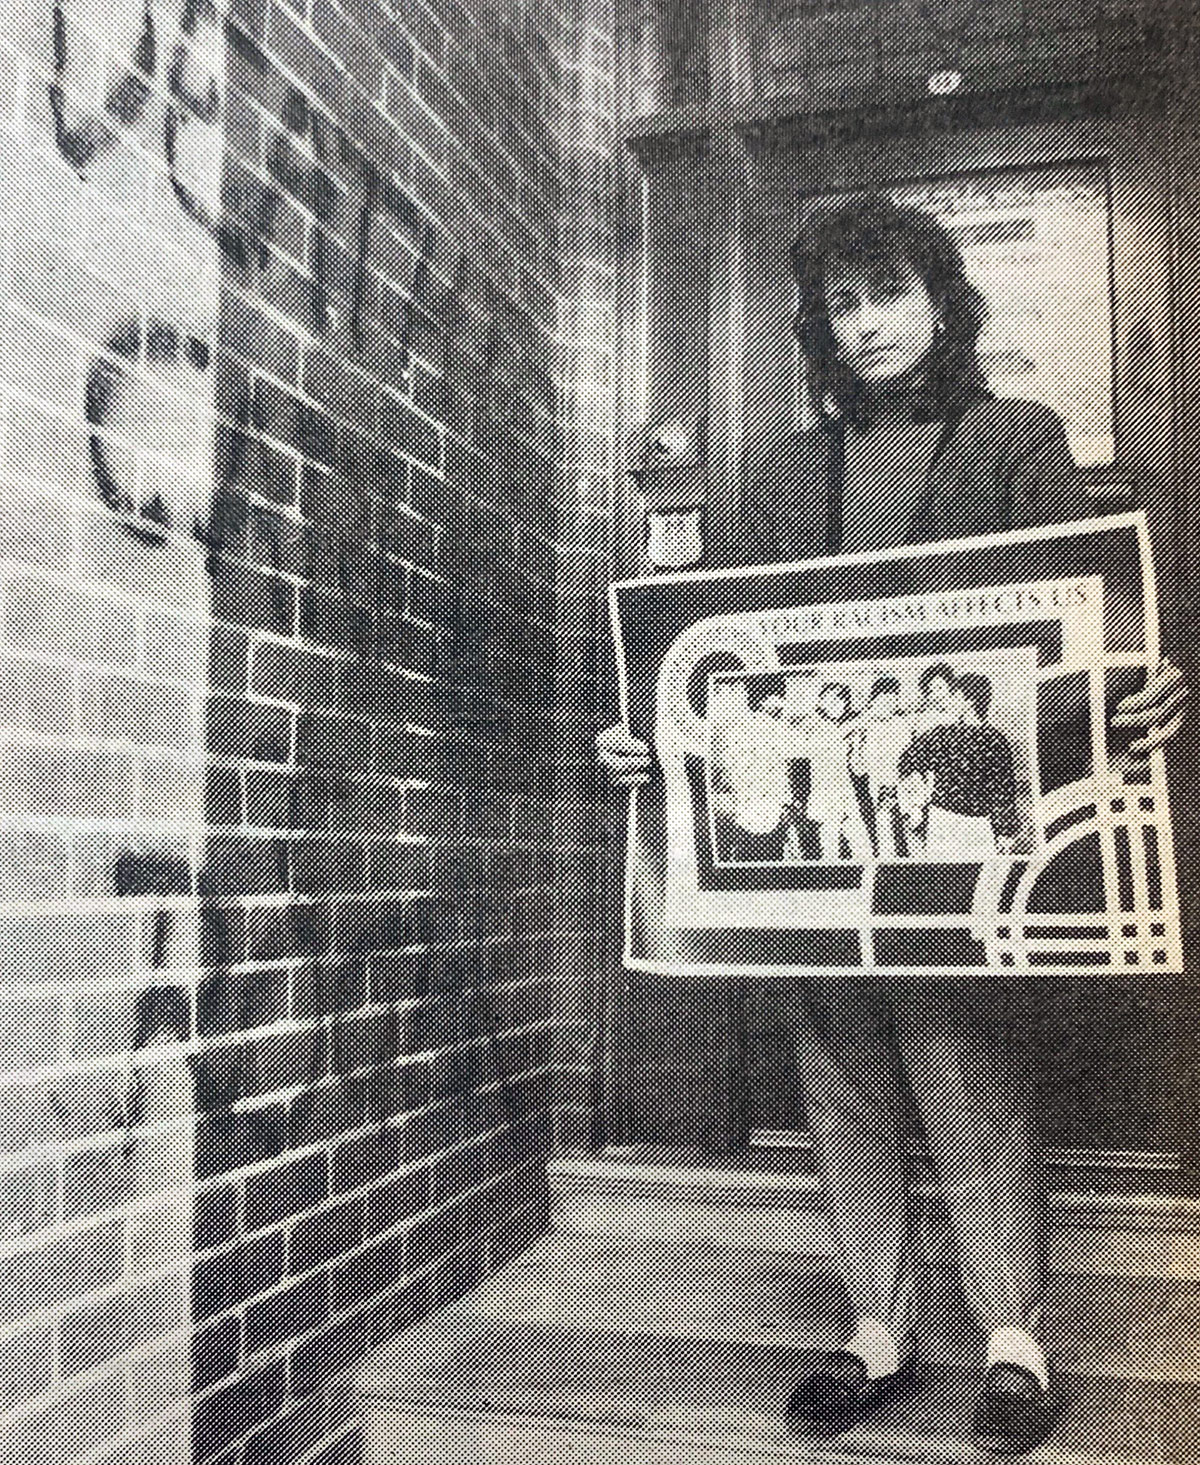 Image of Carmel Guerra beside graffiti as appeared in Talbot D. 1989. ‘Death Threats Against Youth Workers Spark Anger and Concern’, Coburg Courier, 20 June 1989, p1.